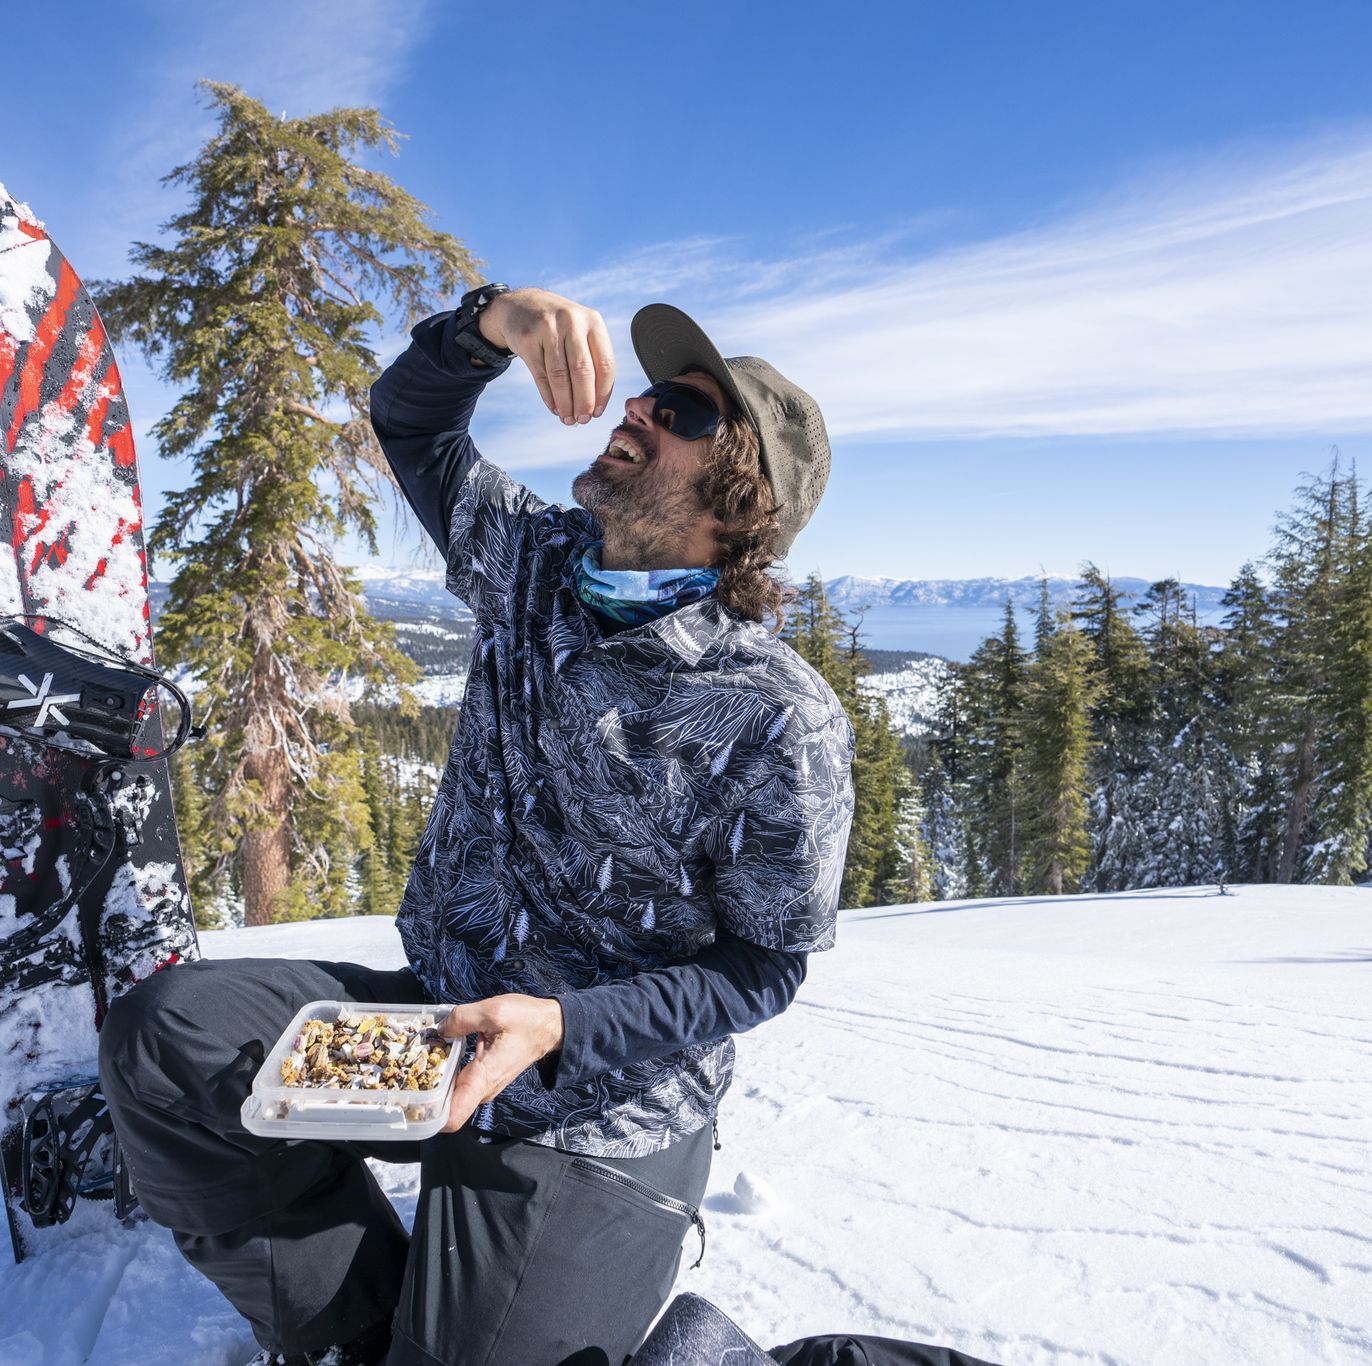 Here's What You Should Actually Eat on Your Next Outdoor Adventure